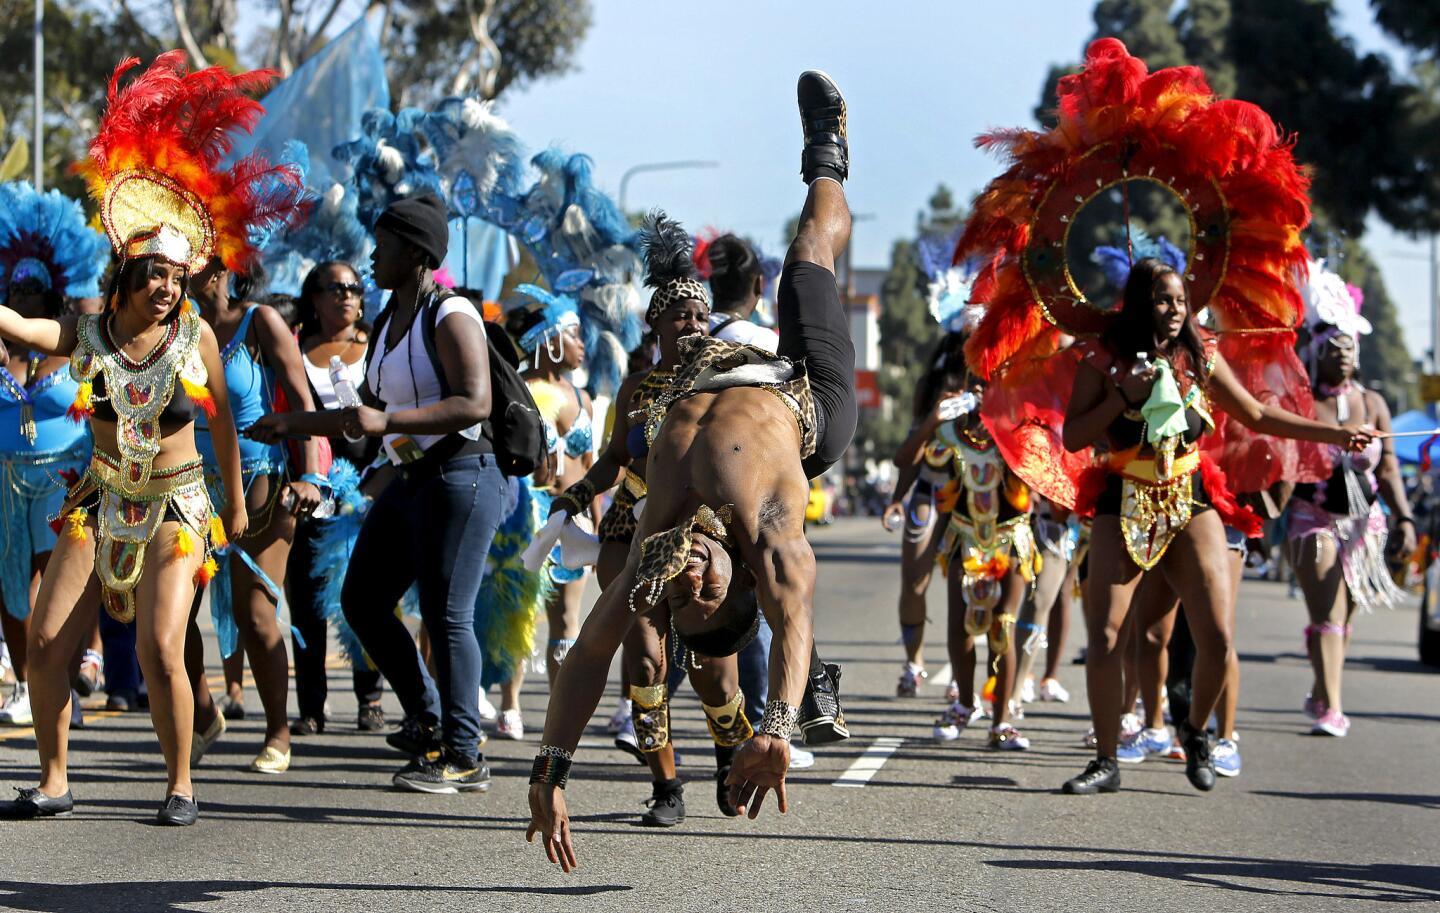 Thomas Morrison, center, performs with the Caribbean dance group Trinifeters at the 29th annual Kingdom Day Parade on Martin Luther King Blvd. in Los Angeles.